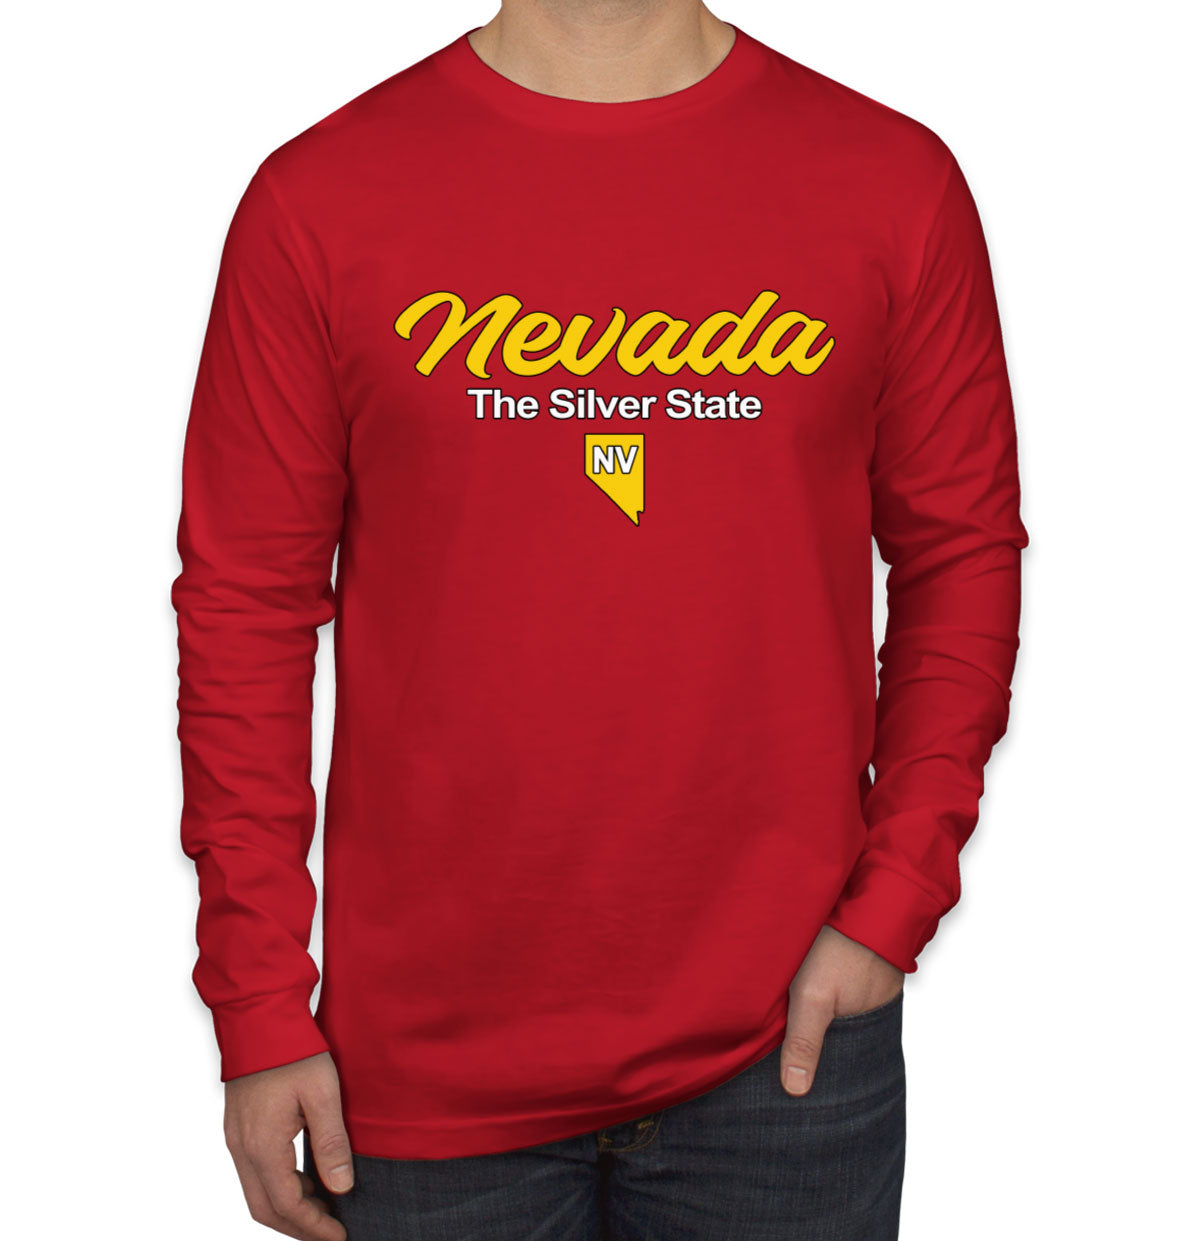 Nevada The Silver State Men's Long Sleeve Shirt